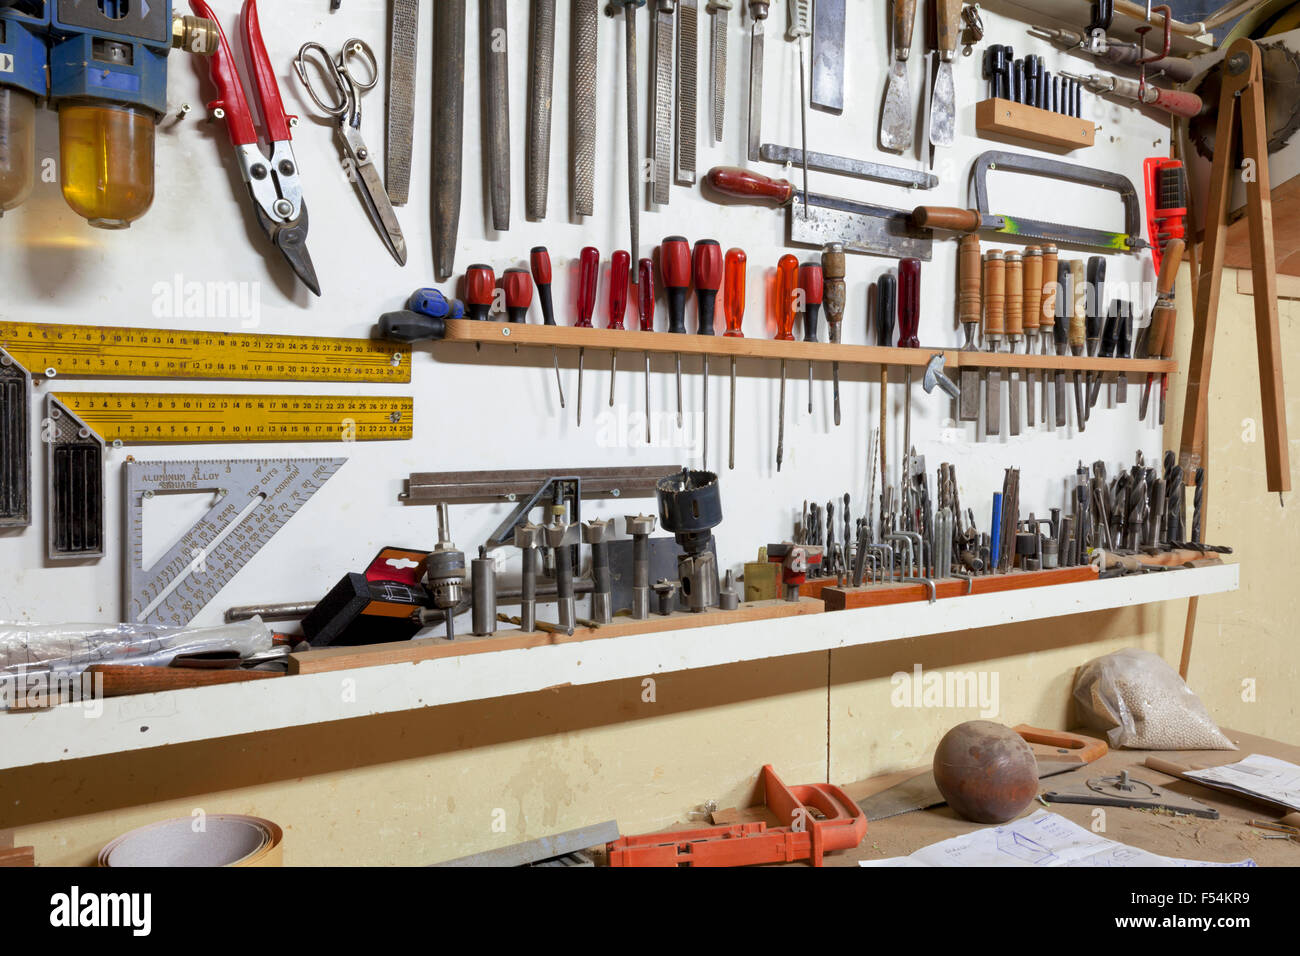 shelf with hand tools for woodworking Stock Photo